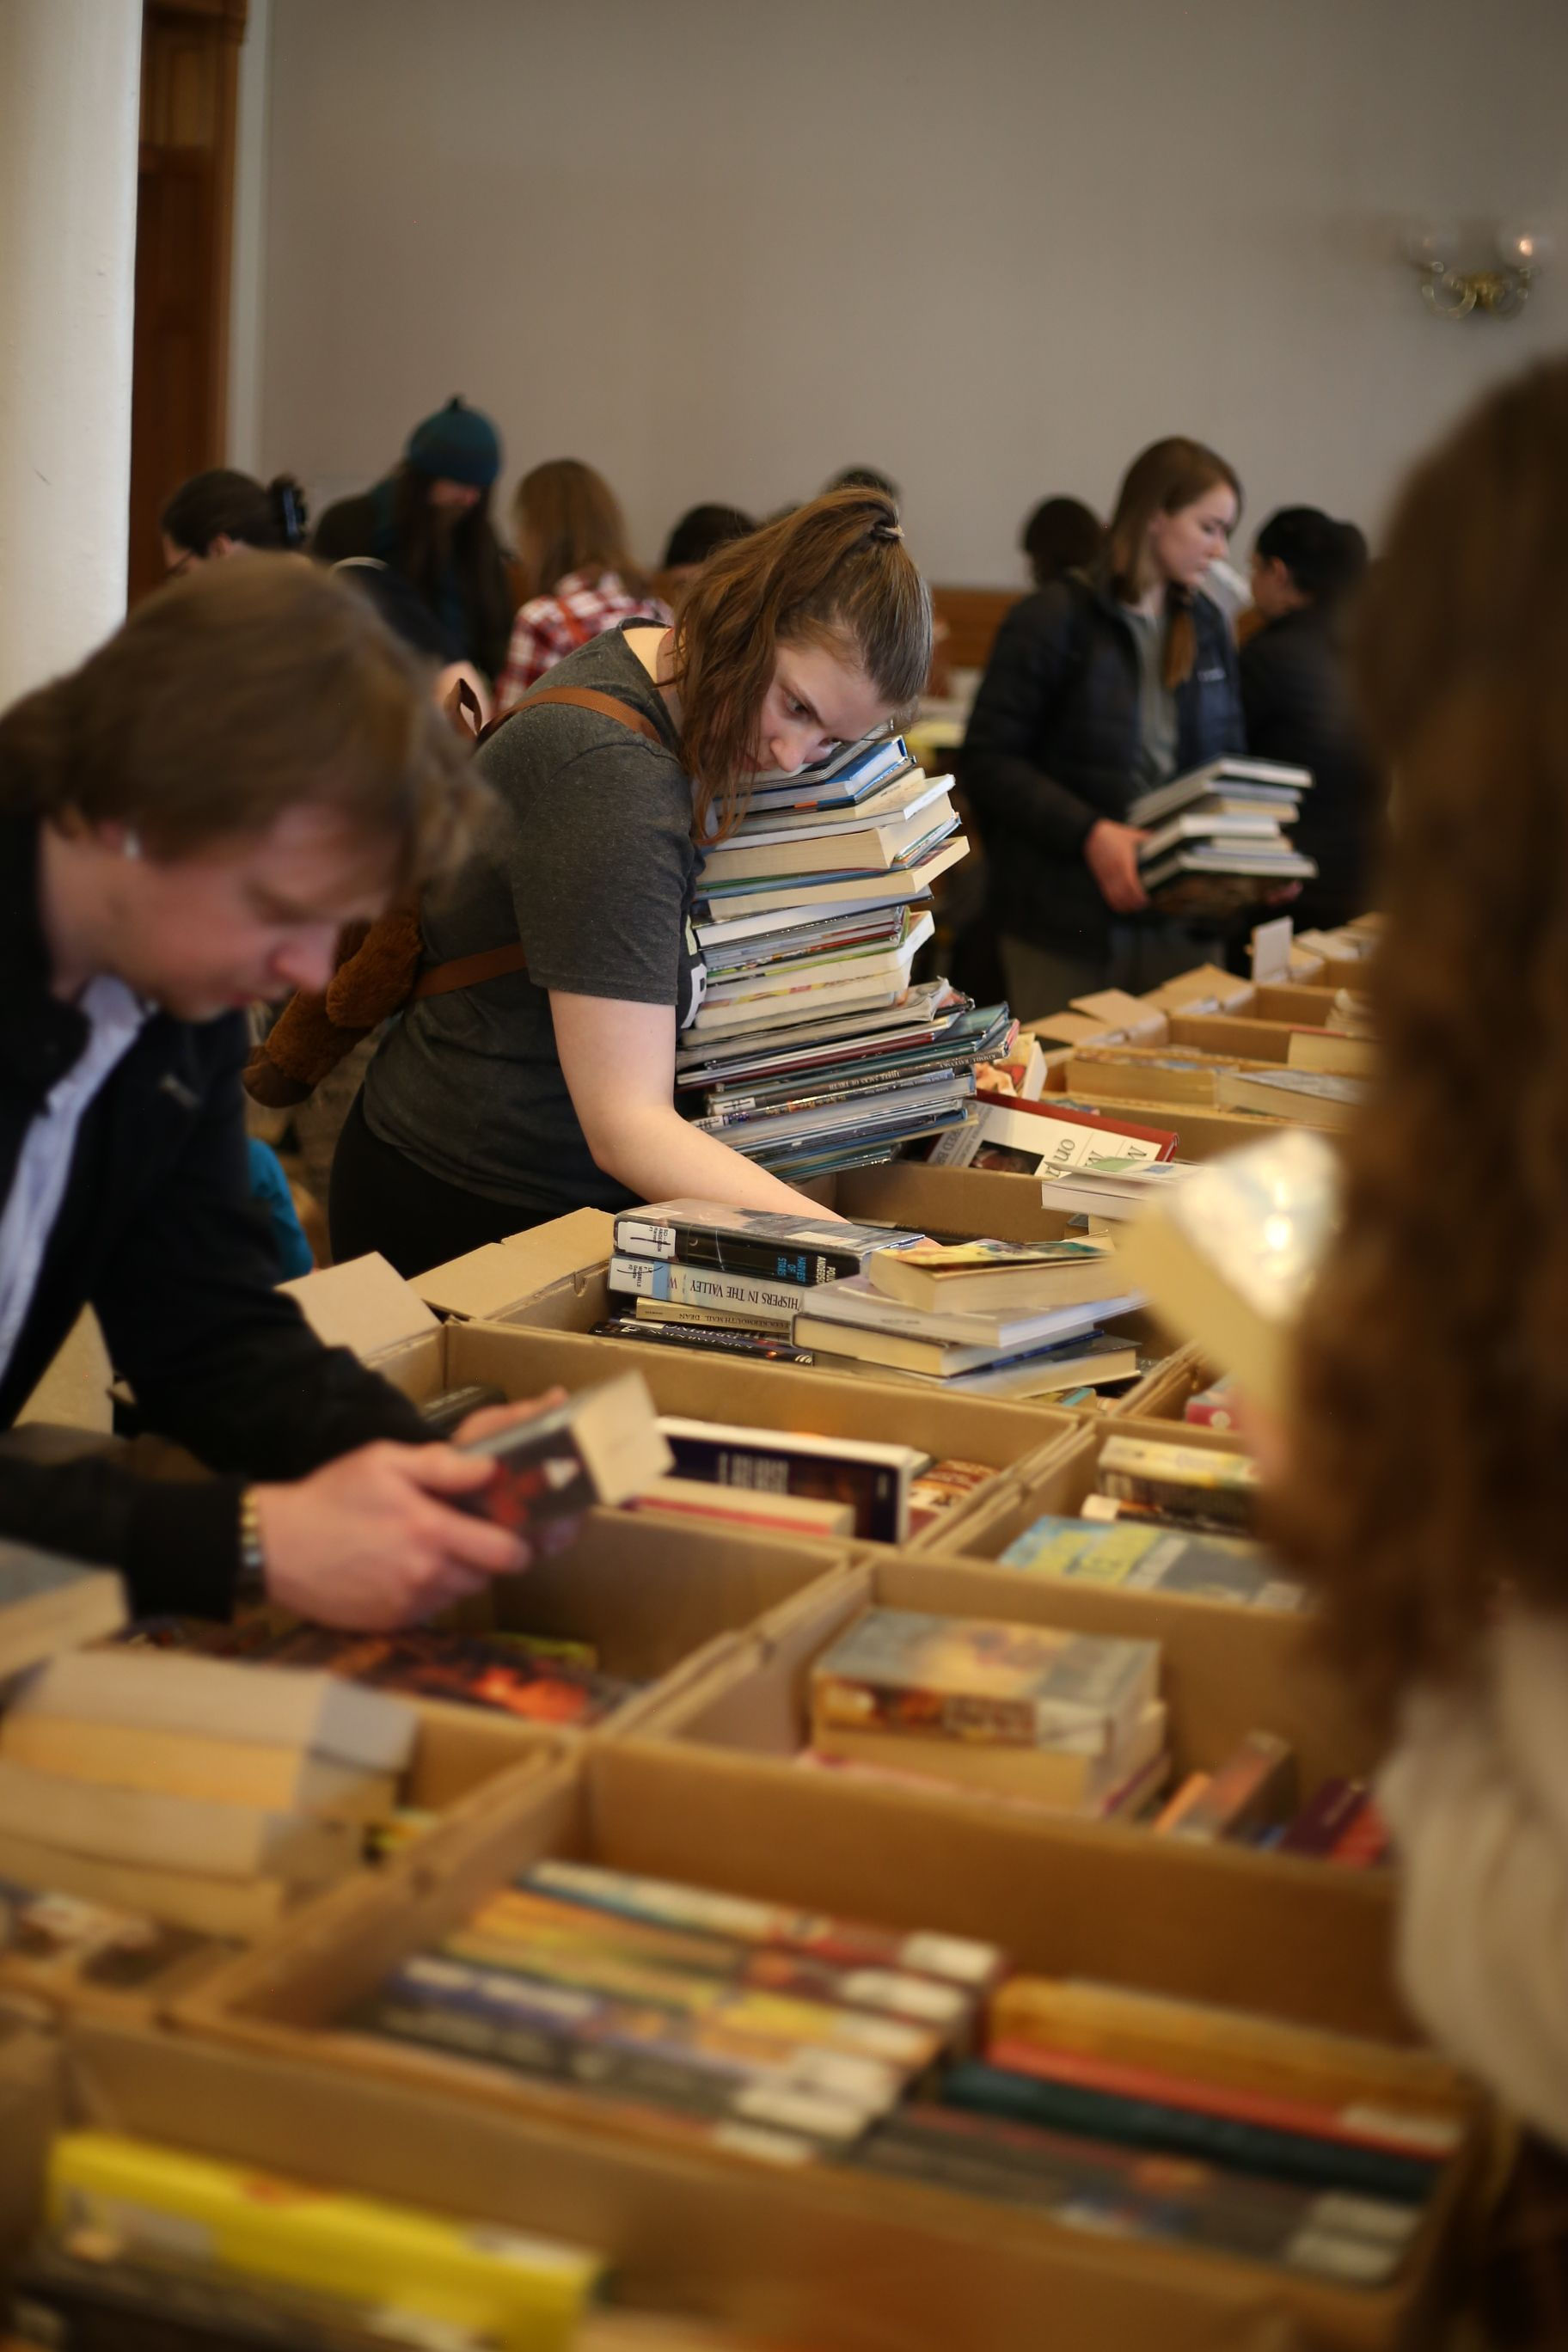 Attendees grabbed as many books as they could carry at the Provo Library used book sale. (McKenna Jensen)